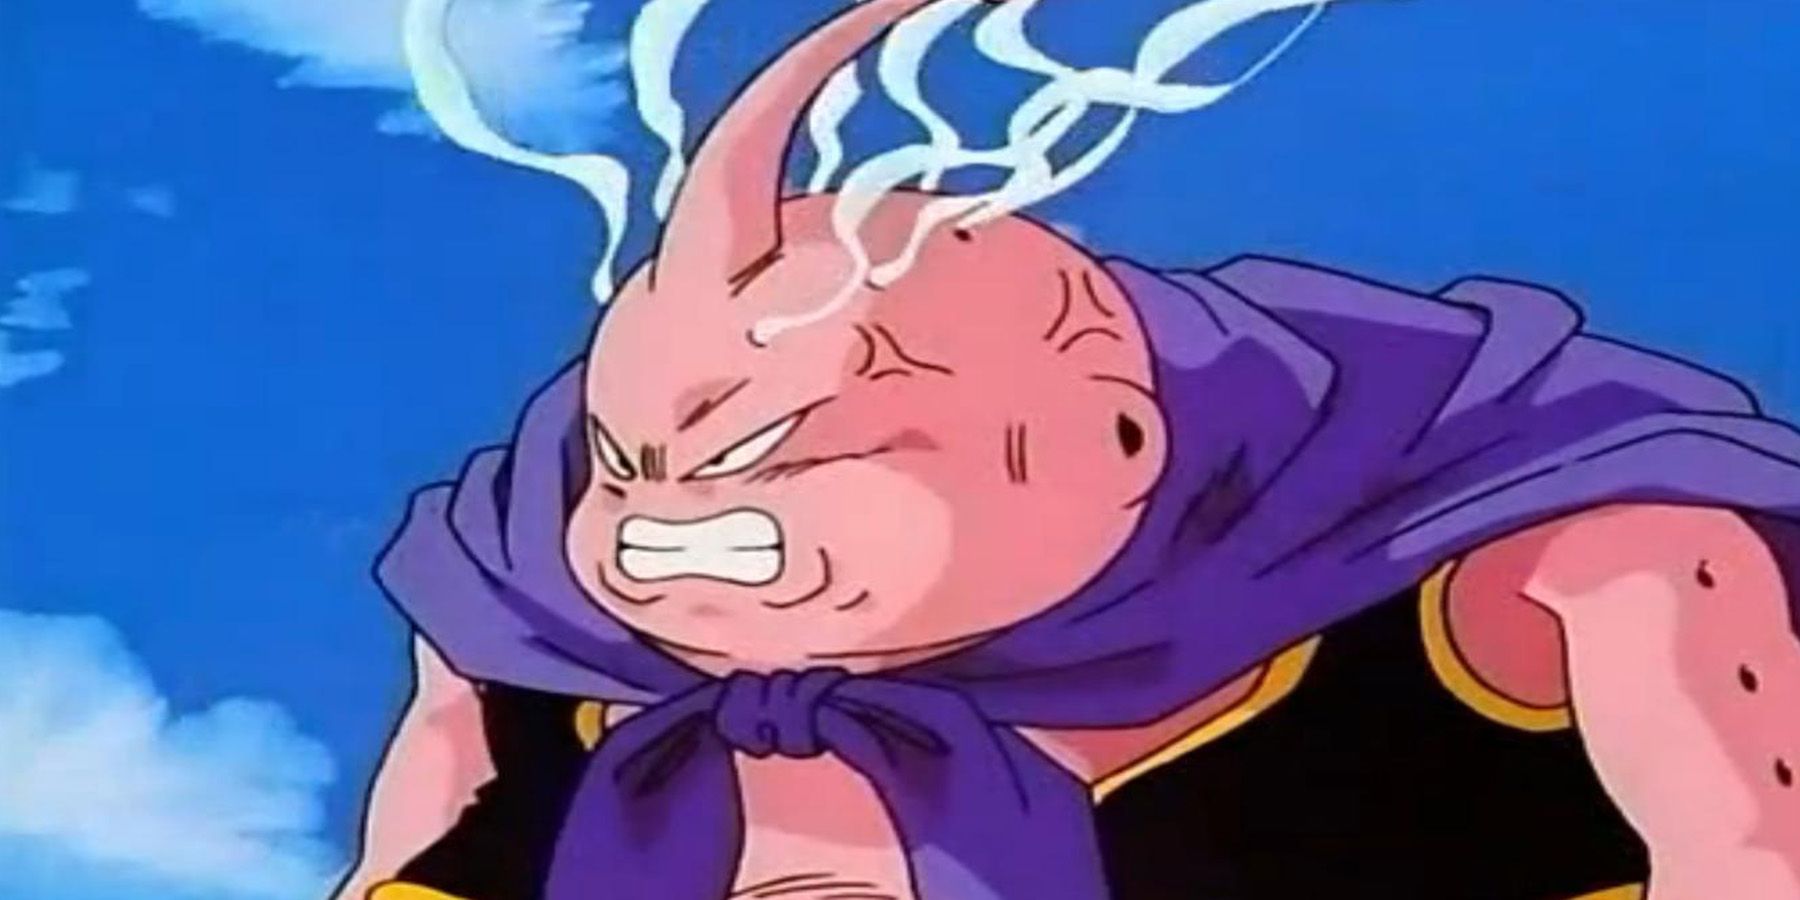 Dragon Ball Super's New Arc is What DBZ's Buu Saga Should Have Been